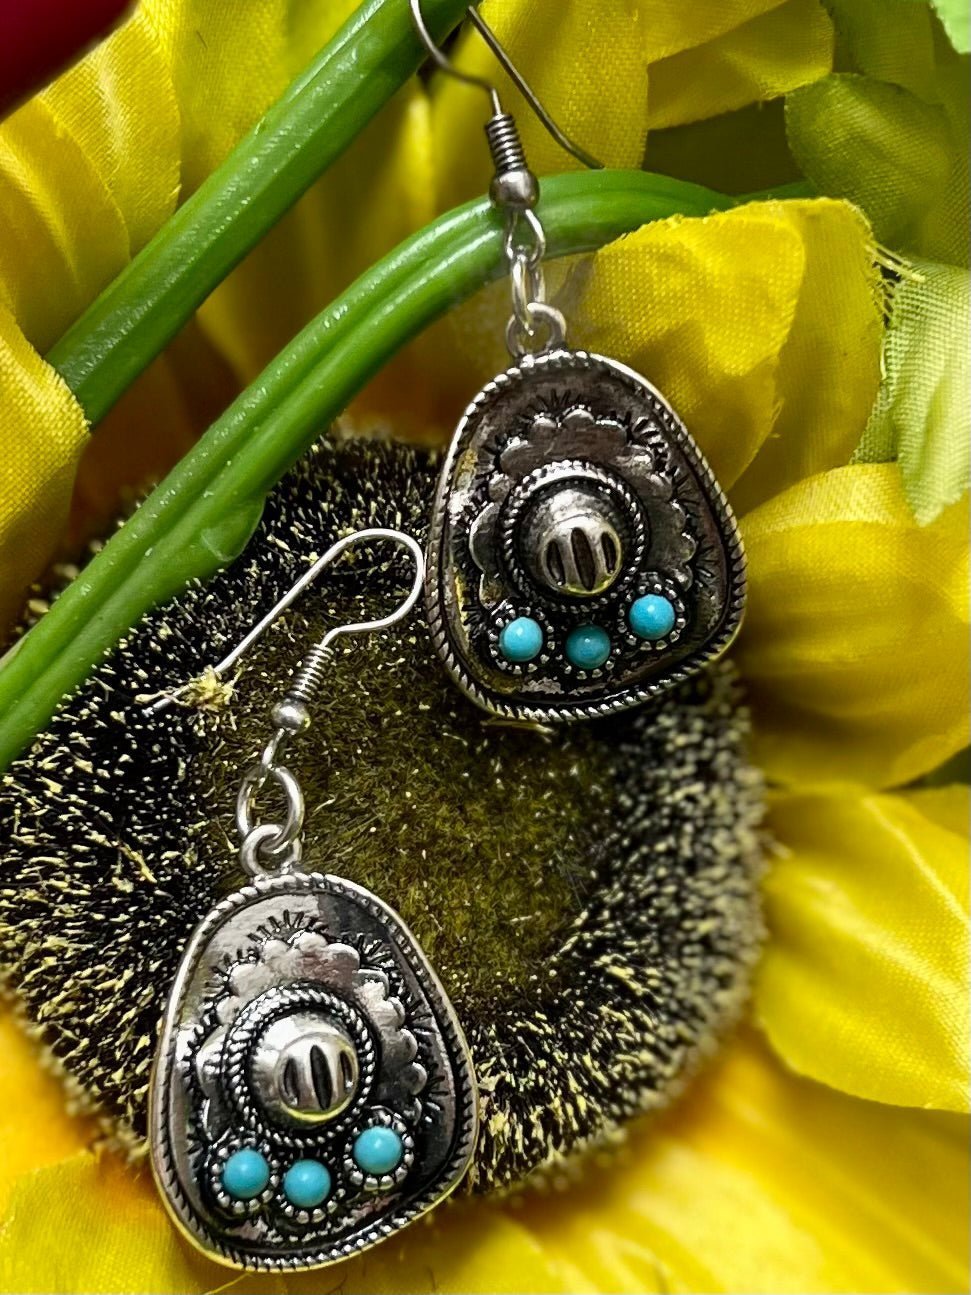 Add some Western flair to any outfit with these stylish Life to Hang Your Hat On Earrings! Not only are they the perfect way to add a pop of daring color to your look, but they also feature a cool cowboy hat shape fashioned out of silver and tastefully adorned with turquoise stones. Show the wild, wild west who's boss with these 1 3/4" dangle earrings, secured with the classic fish hook closure. Yeehaw!